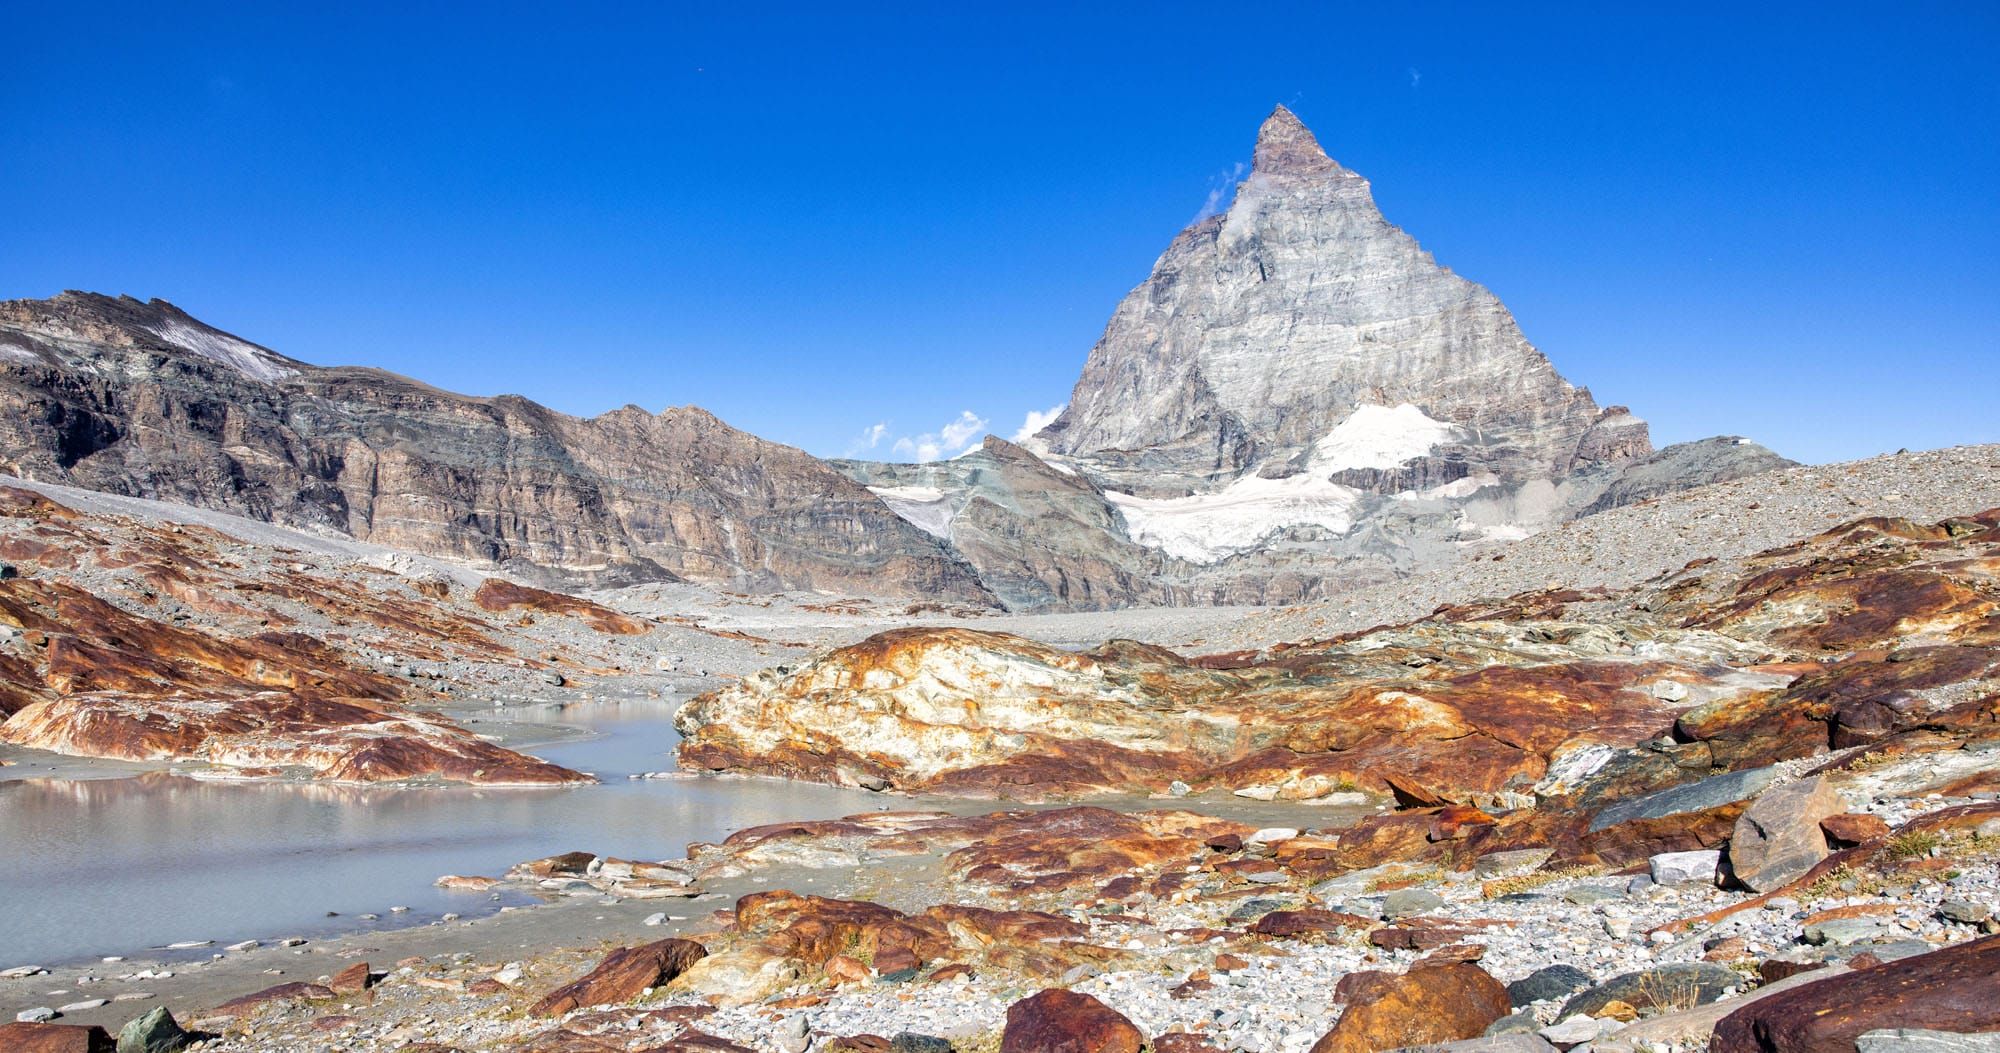 Featured image for “Complete Guide to the Matterhorn Glacier Trail (+ Map, Photos & HELPFUL Tips)”